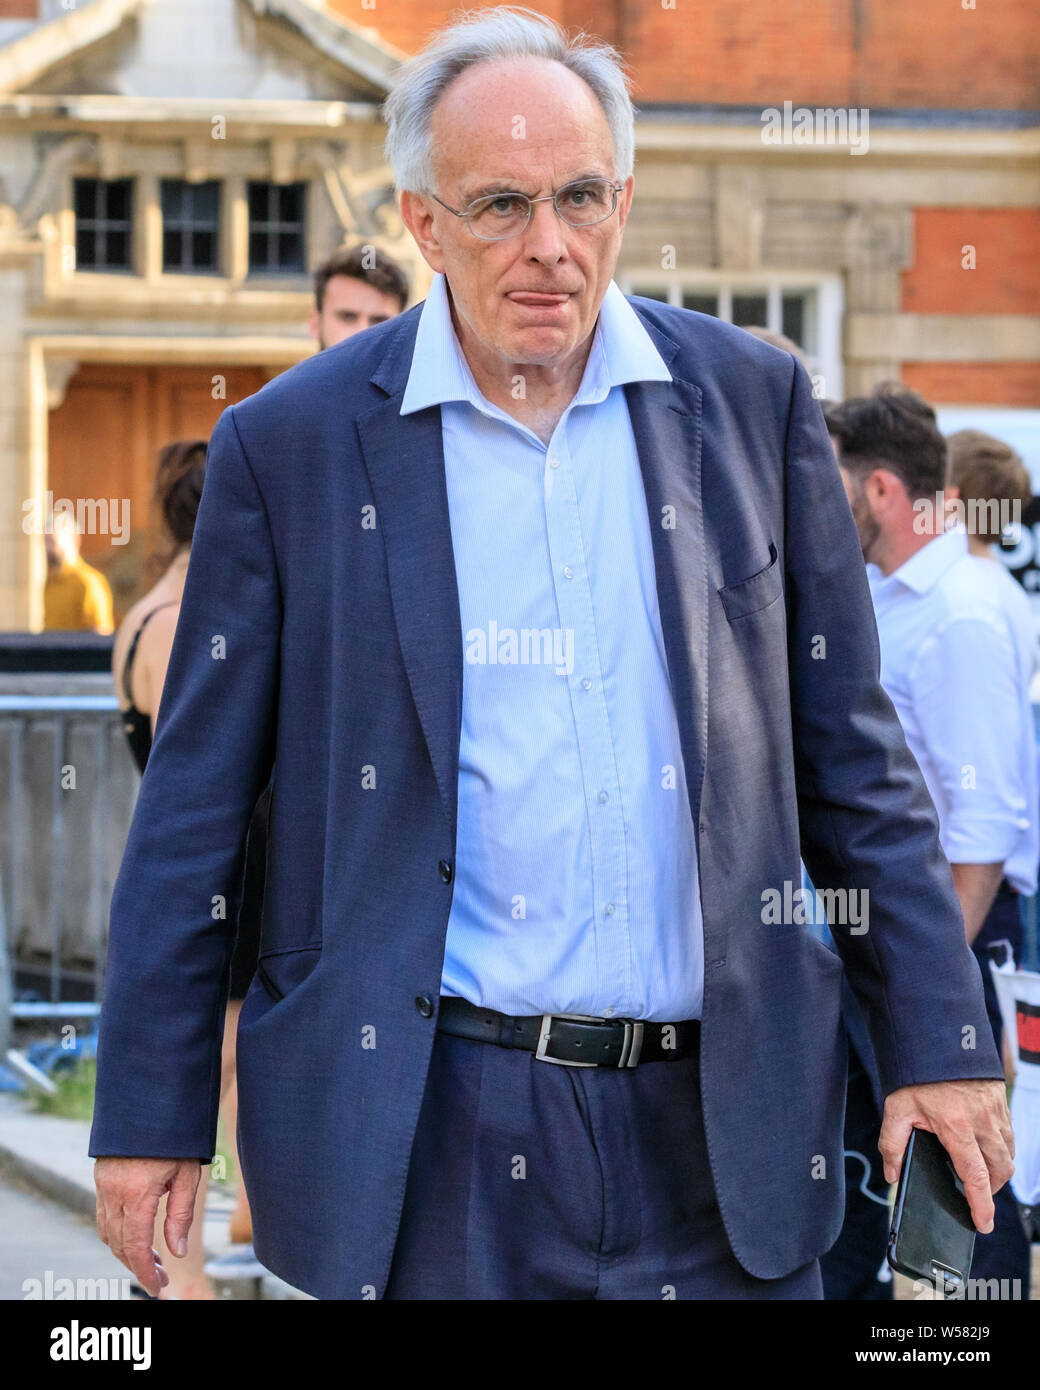 Peter Bone, MP, politician and Conservative Party Member of Parliament for Wellingborough, walking in Westminster, London Stock Photo